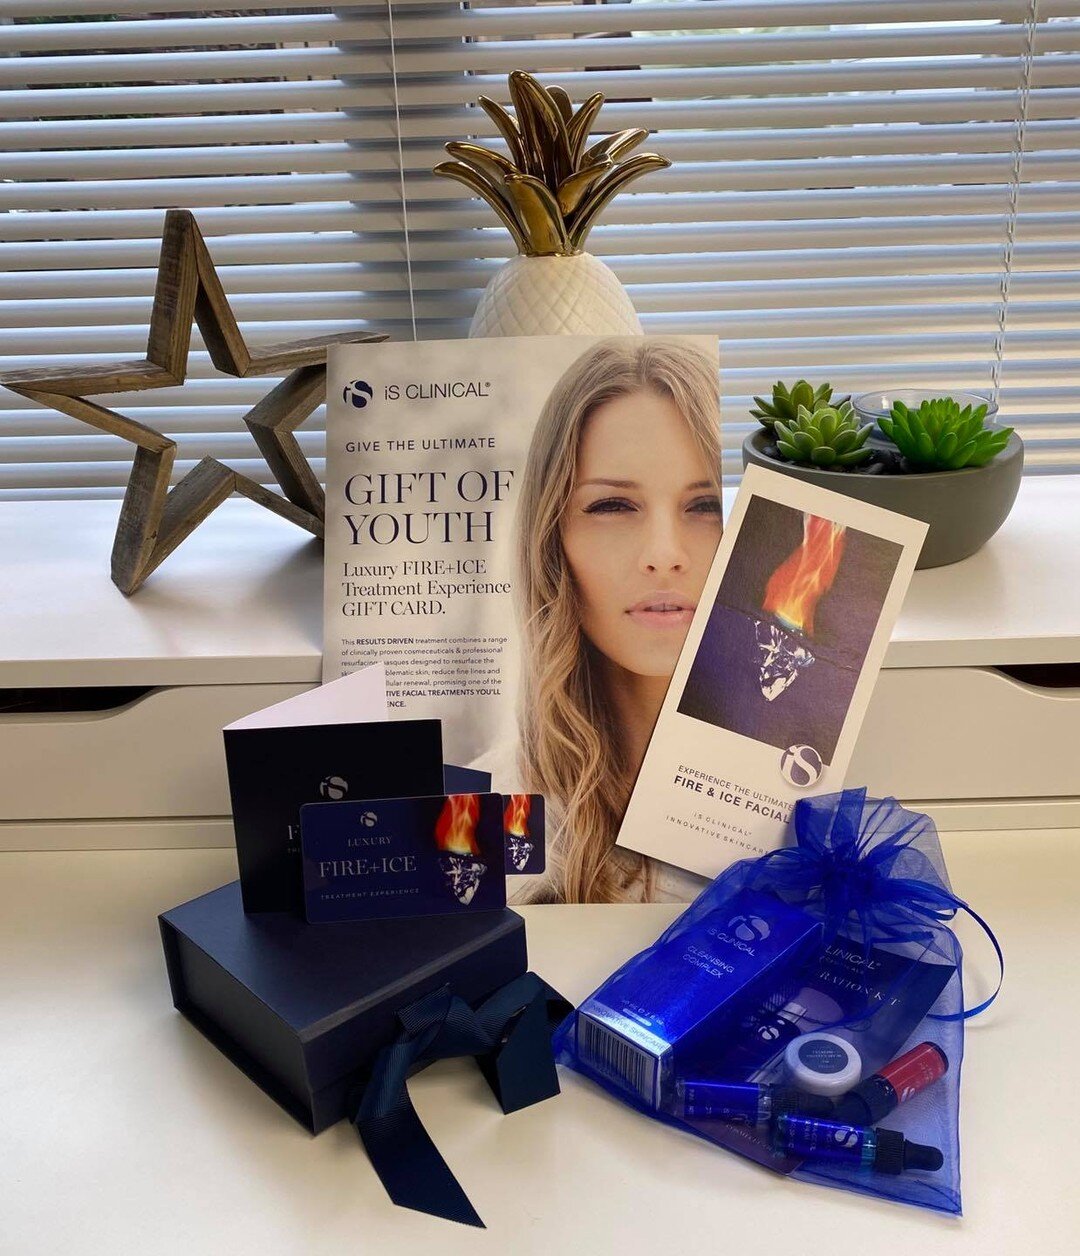 🖤 BLACK FRIDAY OFFER 🖤

Why not treat yourself or a loved one the gift of youth with an amazing iSClinical Fire &amp; Ice Facial 🔥❄️

The offer includes a gift voucher which comes in a beautiful presentation box 🎁 I am also throwing in an introdu